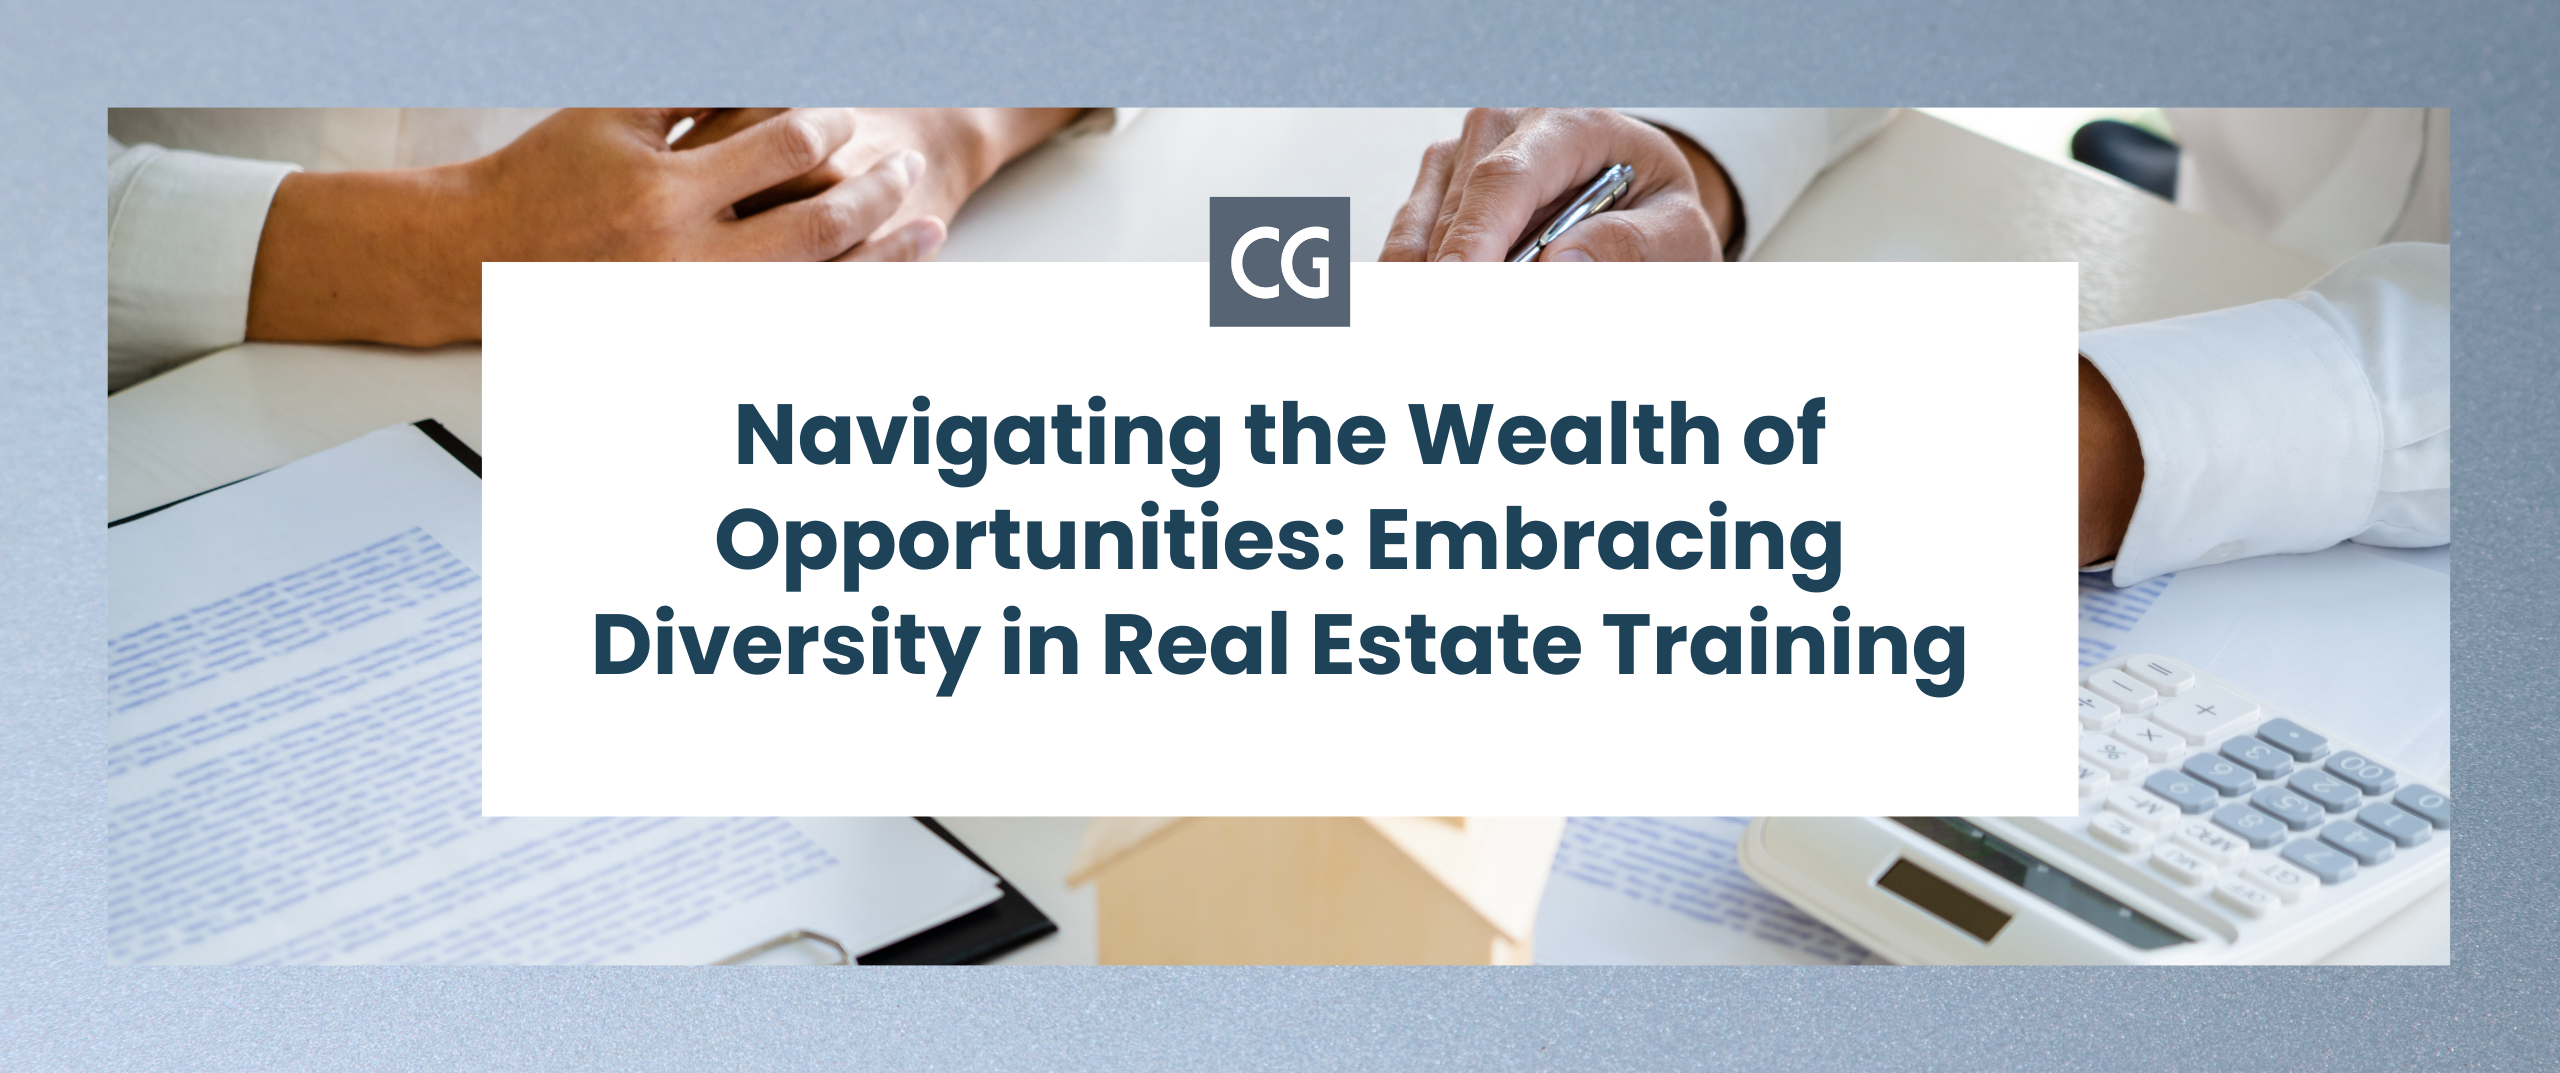 Navigating the Wealth of Opportunities: Embracing Diversity in Real Estate Training